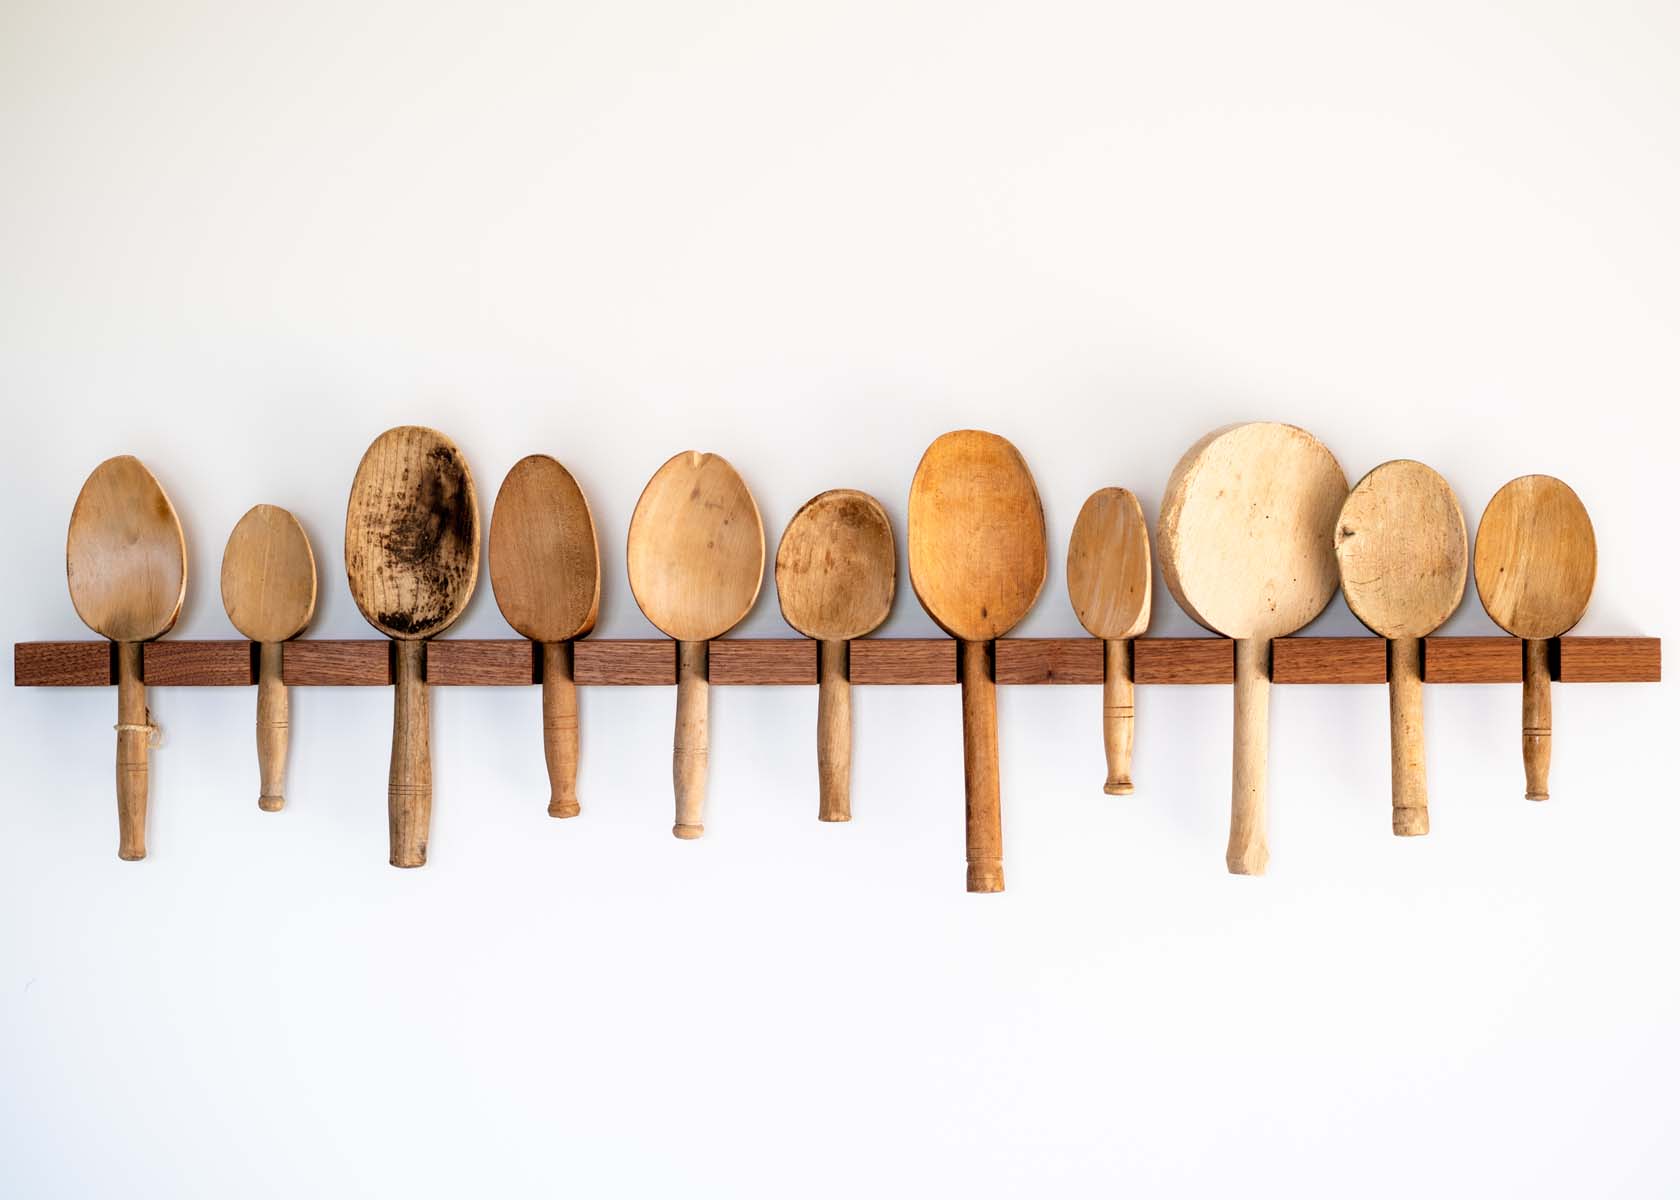 A rack of wooden spoons